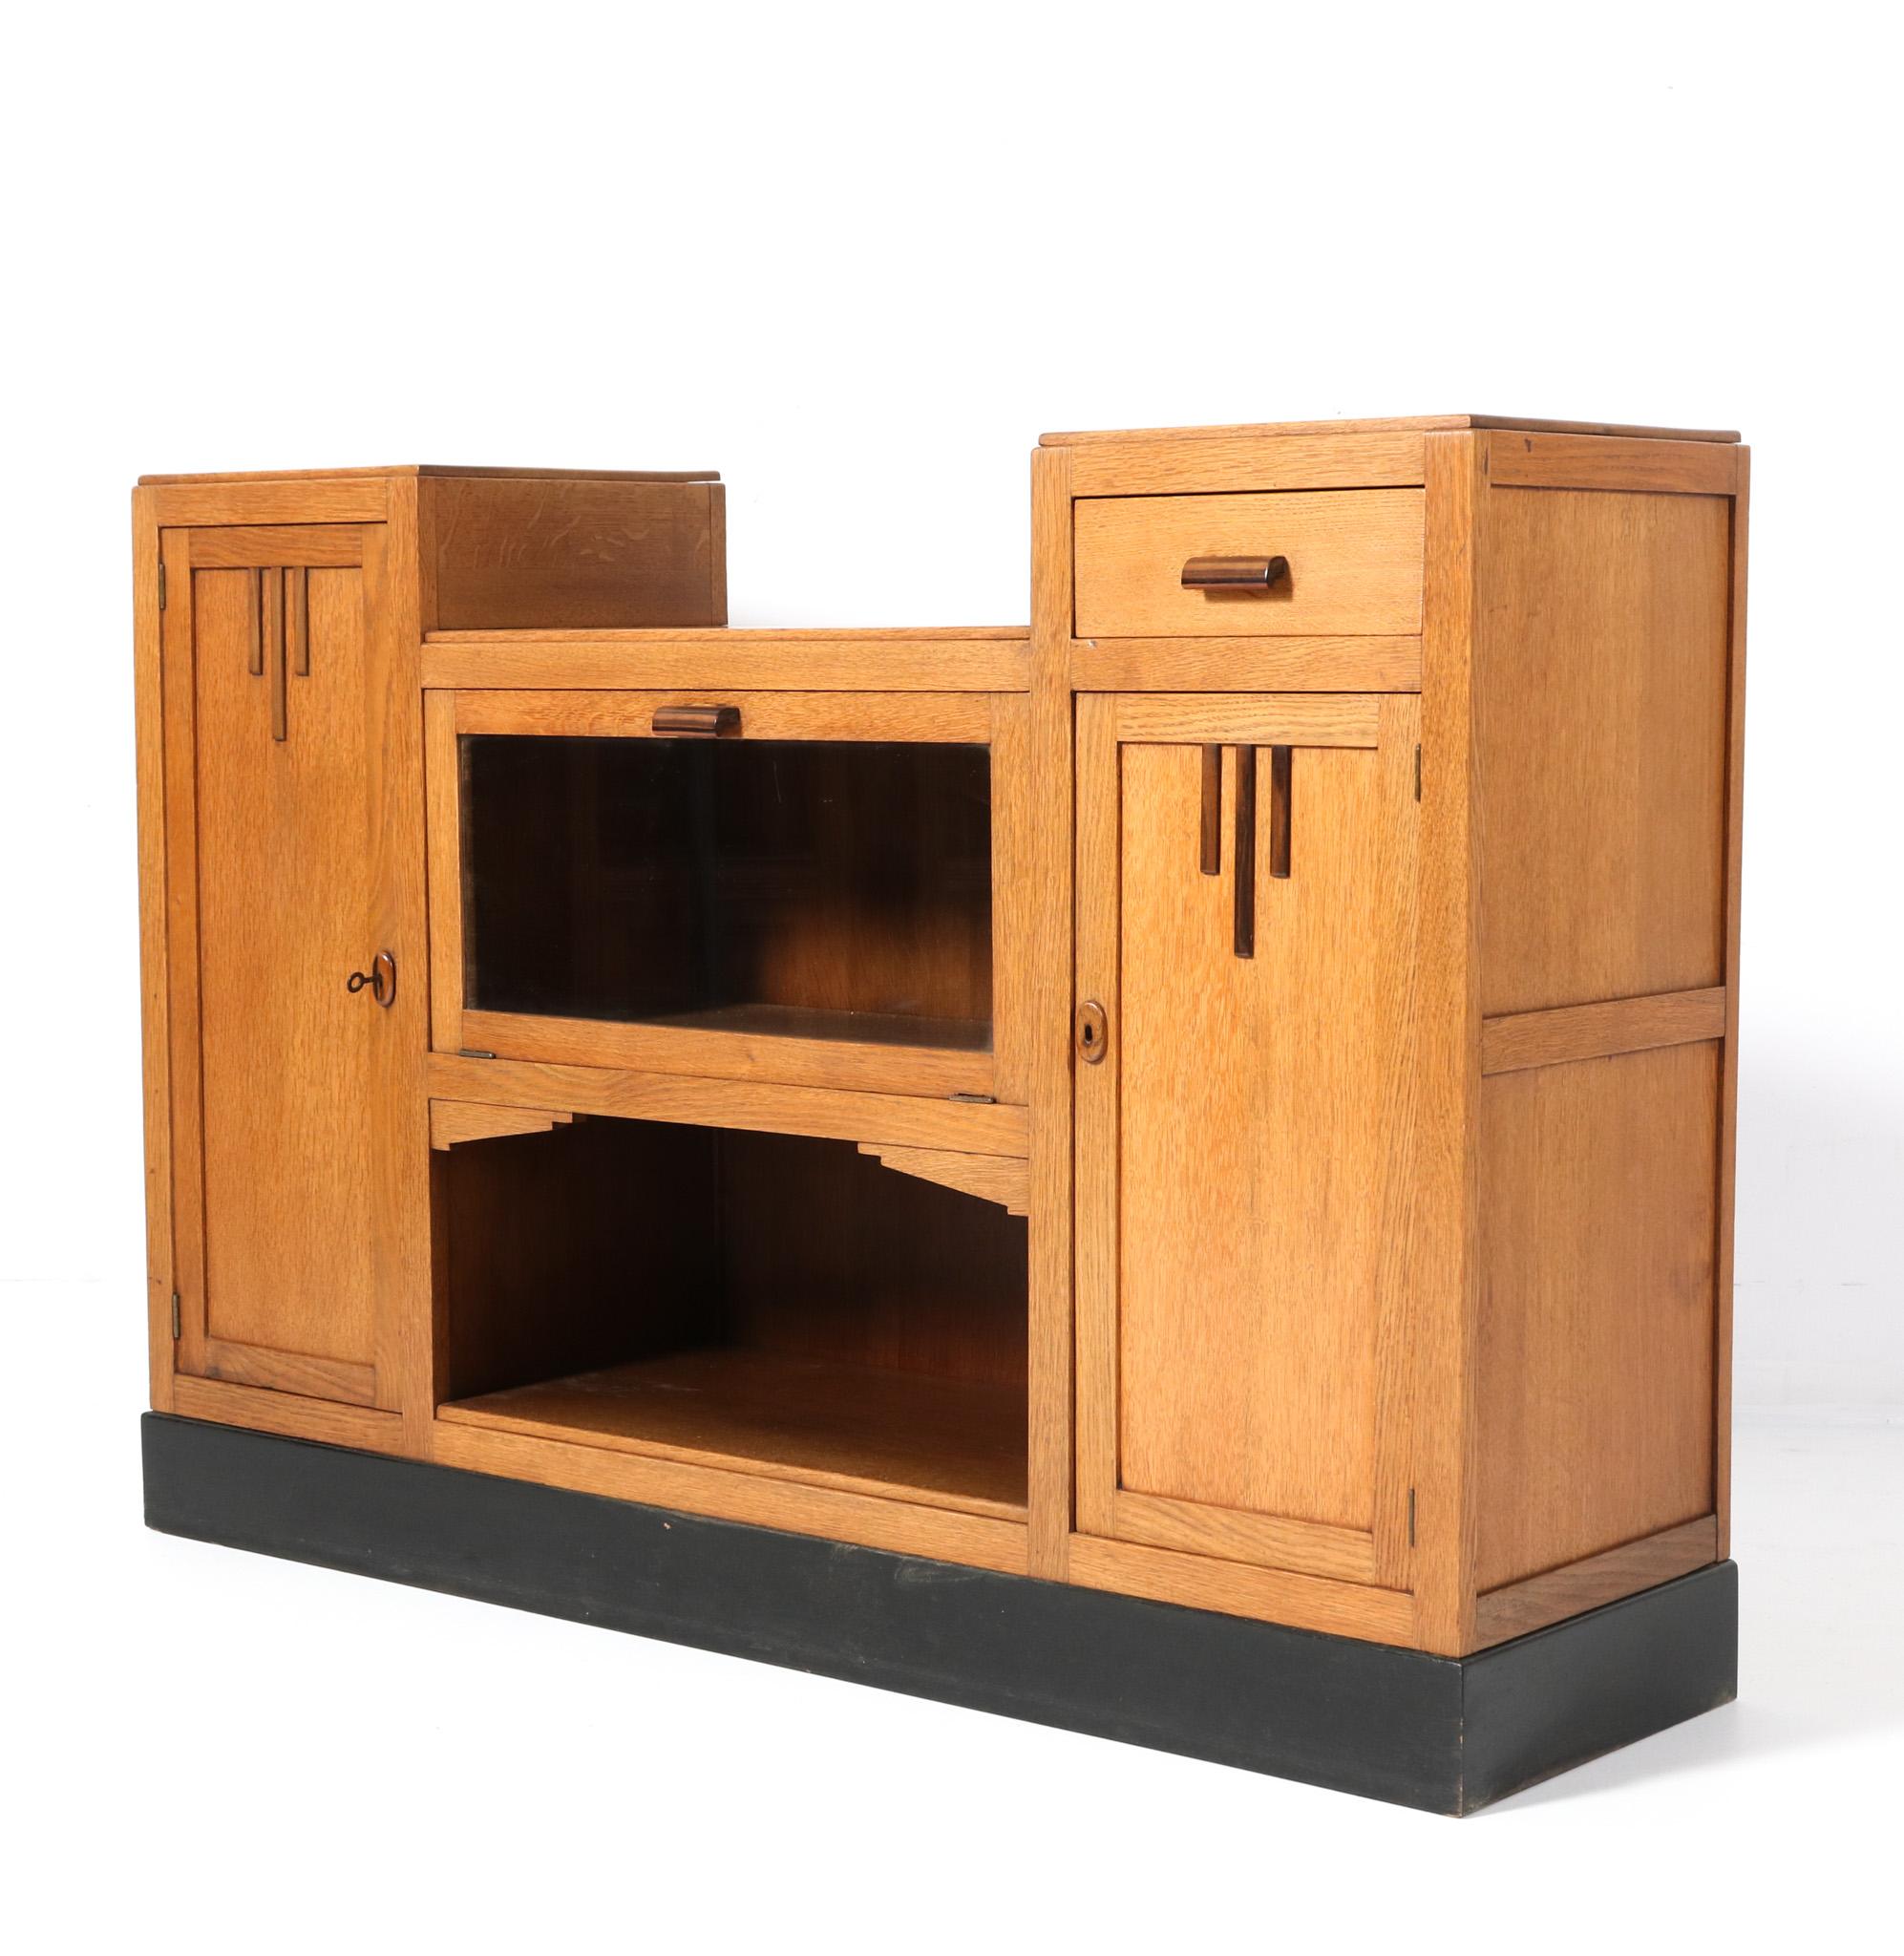 Early 20th Century Oak Art Deco Modernist Credenza or Sideboard, 1920s For Sale